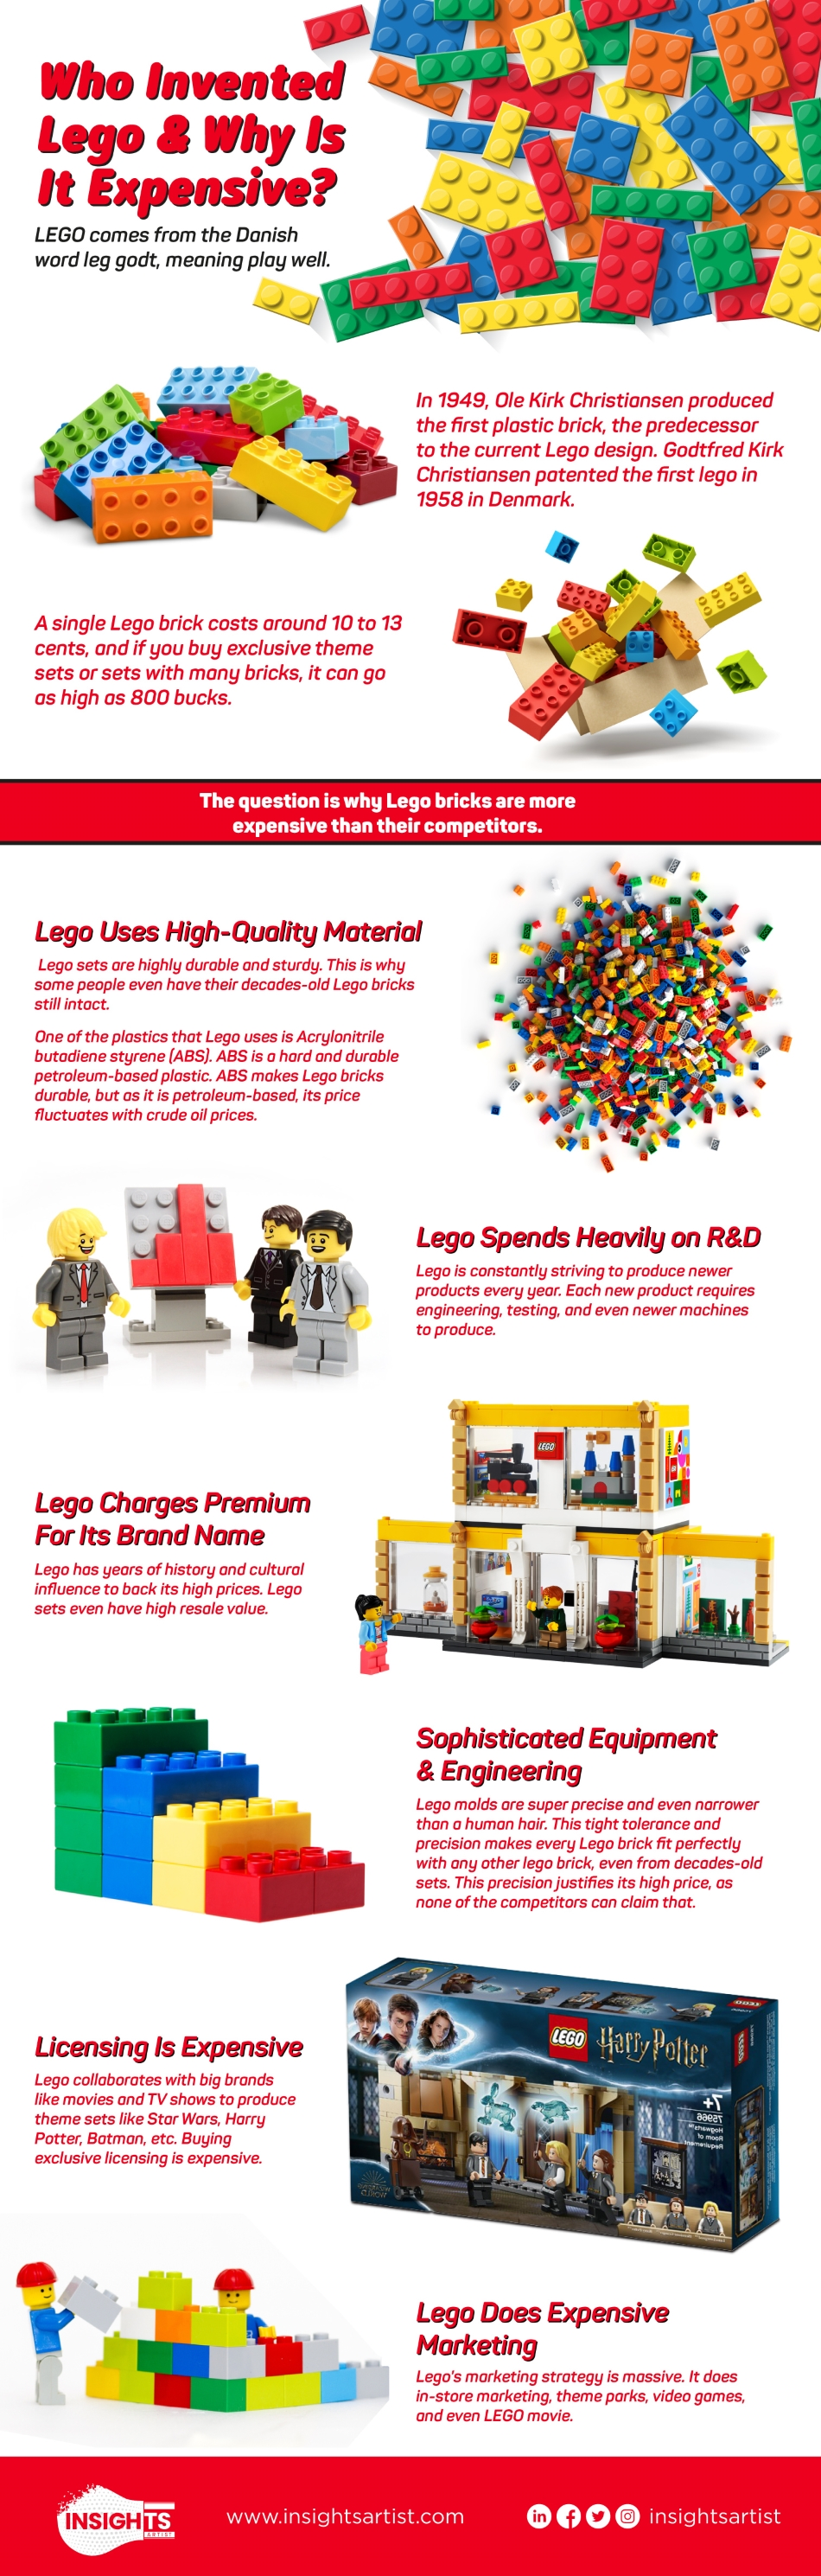 Who Invented Lego & Why It Expensive? | Visual Content